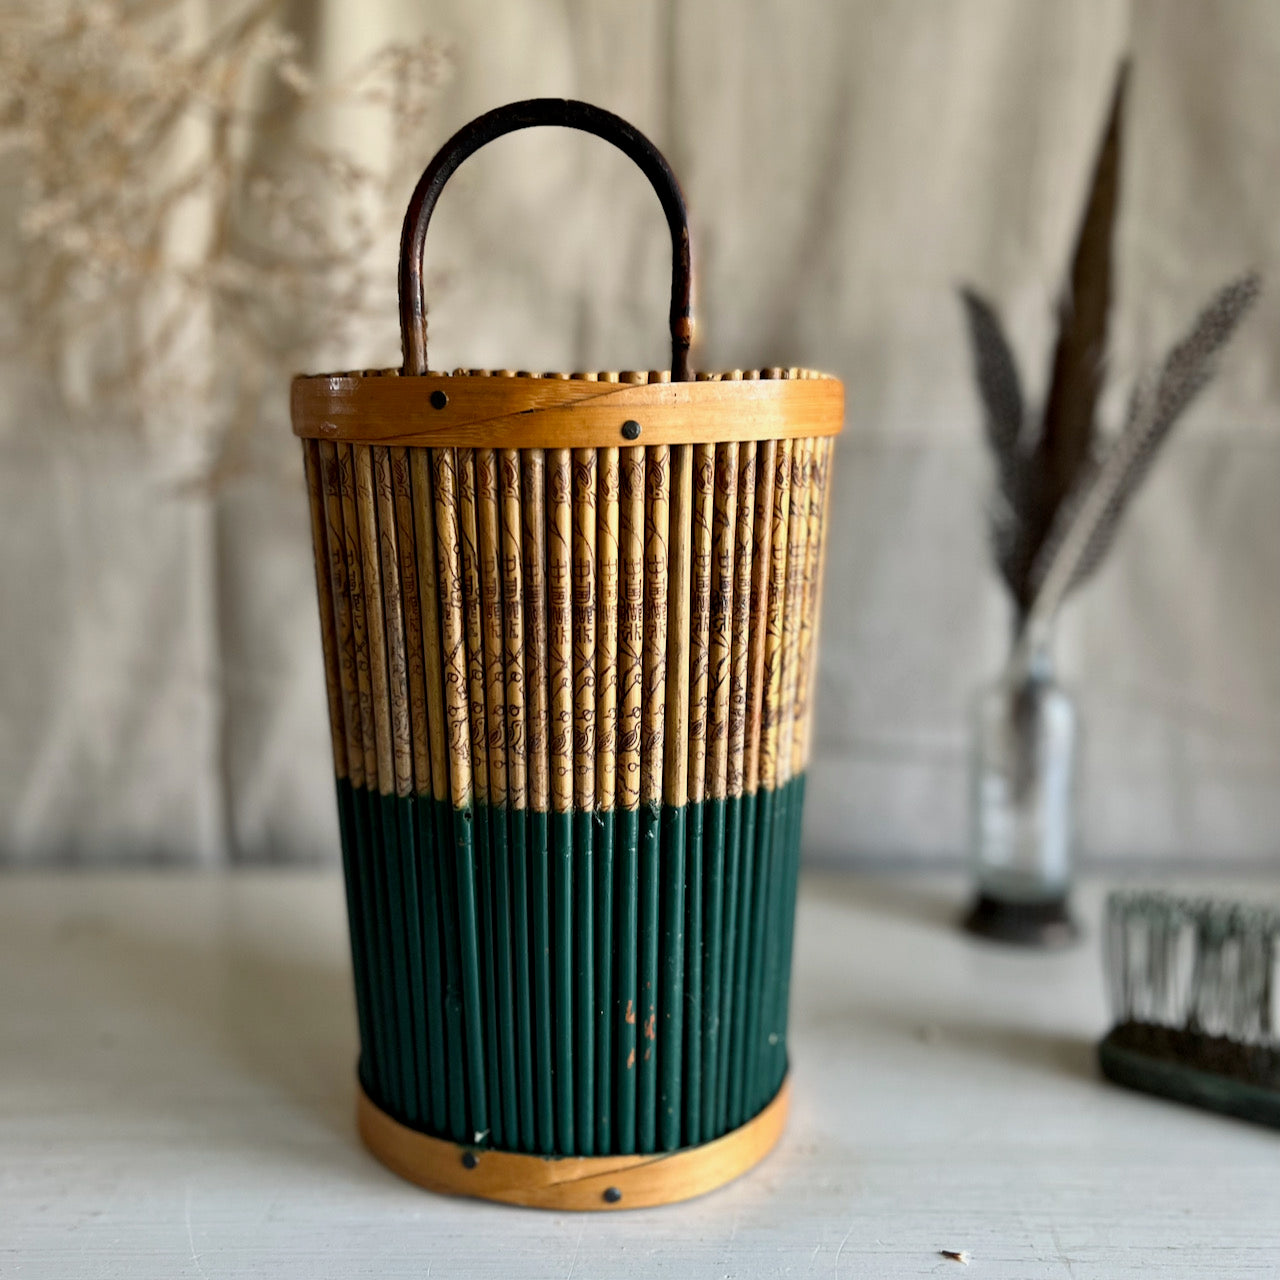 Vintage Bamboo Hanging Wall Basket with Asian Design